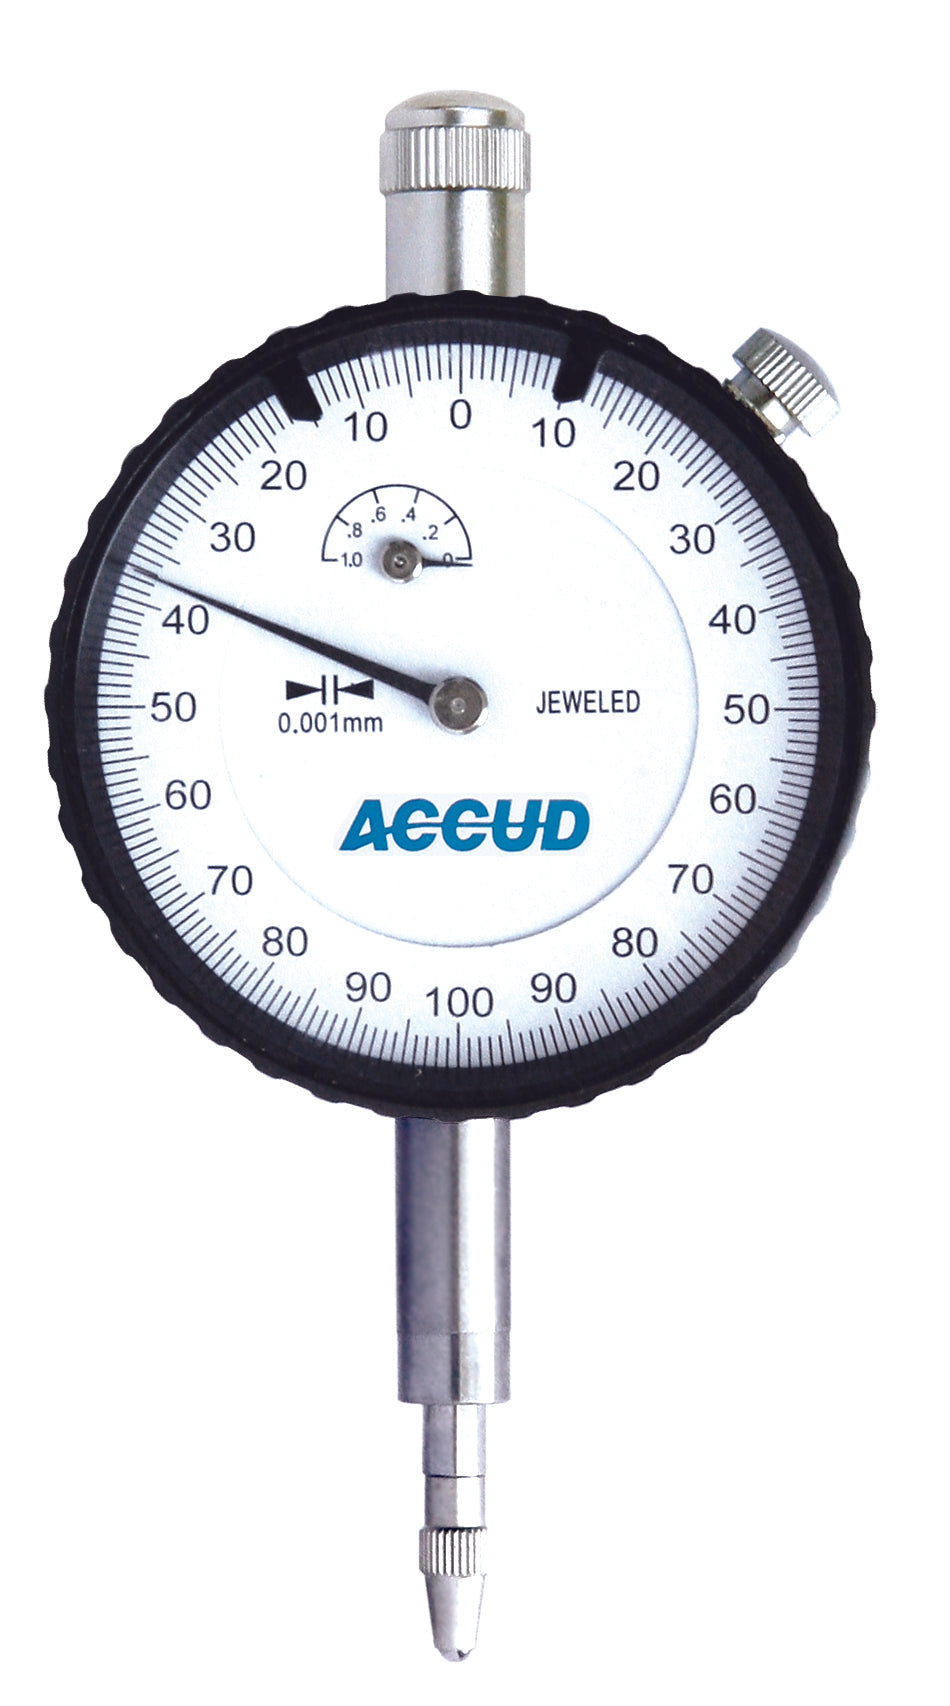 accud-dial-indicator-with-calibration-certific-ac222-010-12q-1